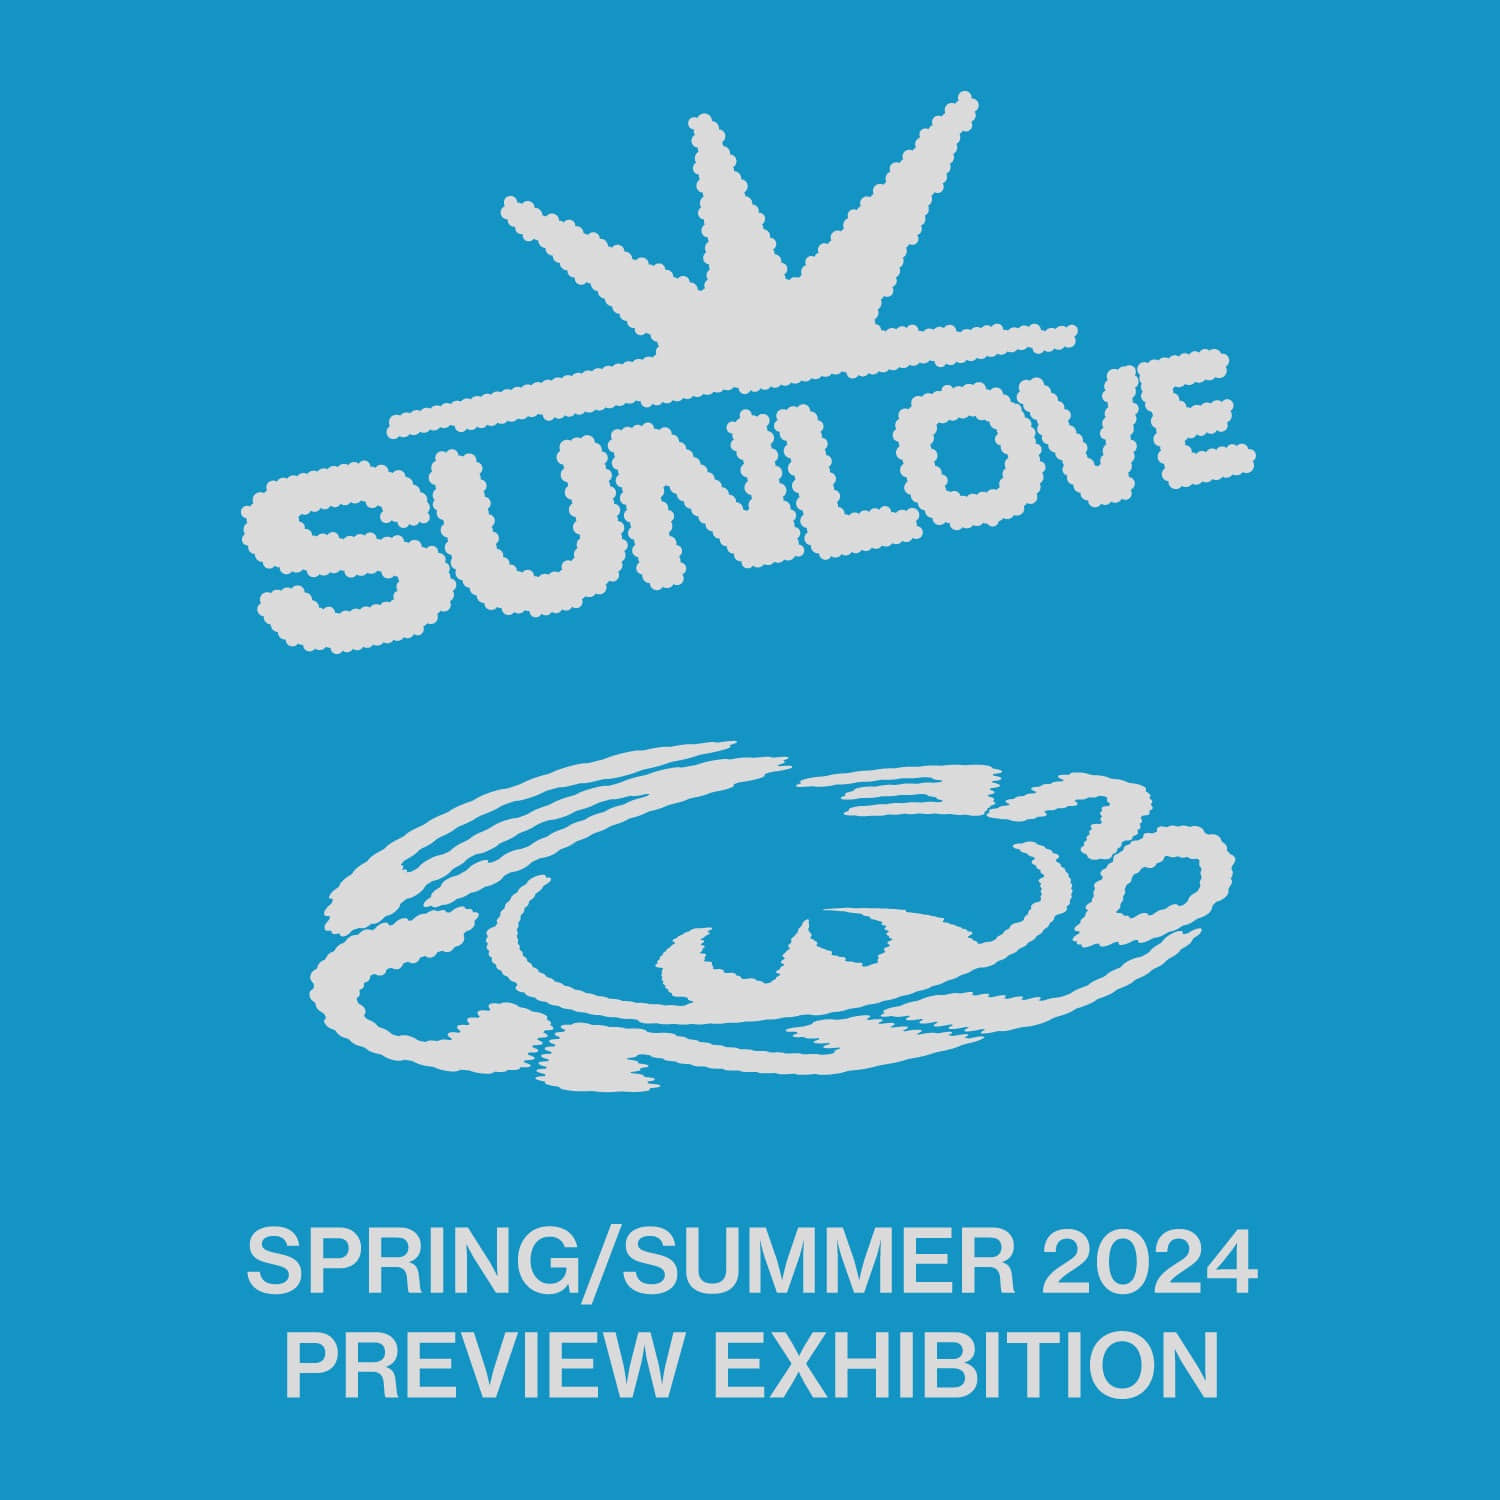 SPRING/SUMMER 2024PREVIEW EXHIBITION